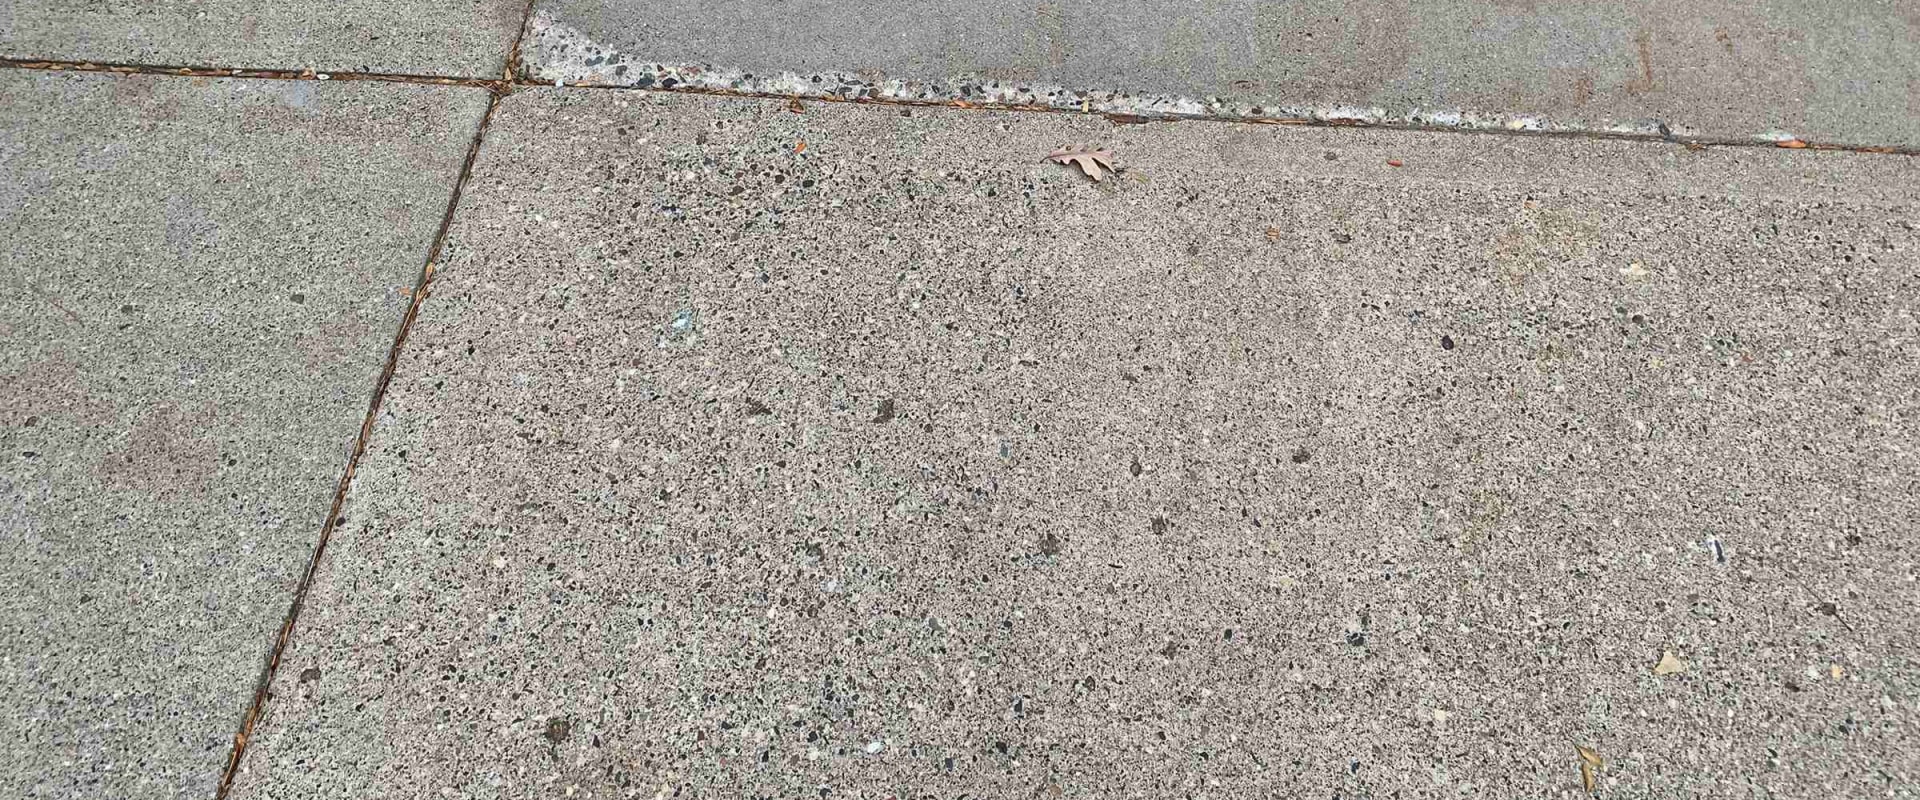 Is it better to resurface or replace driveway?